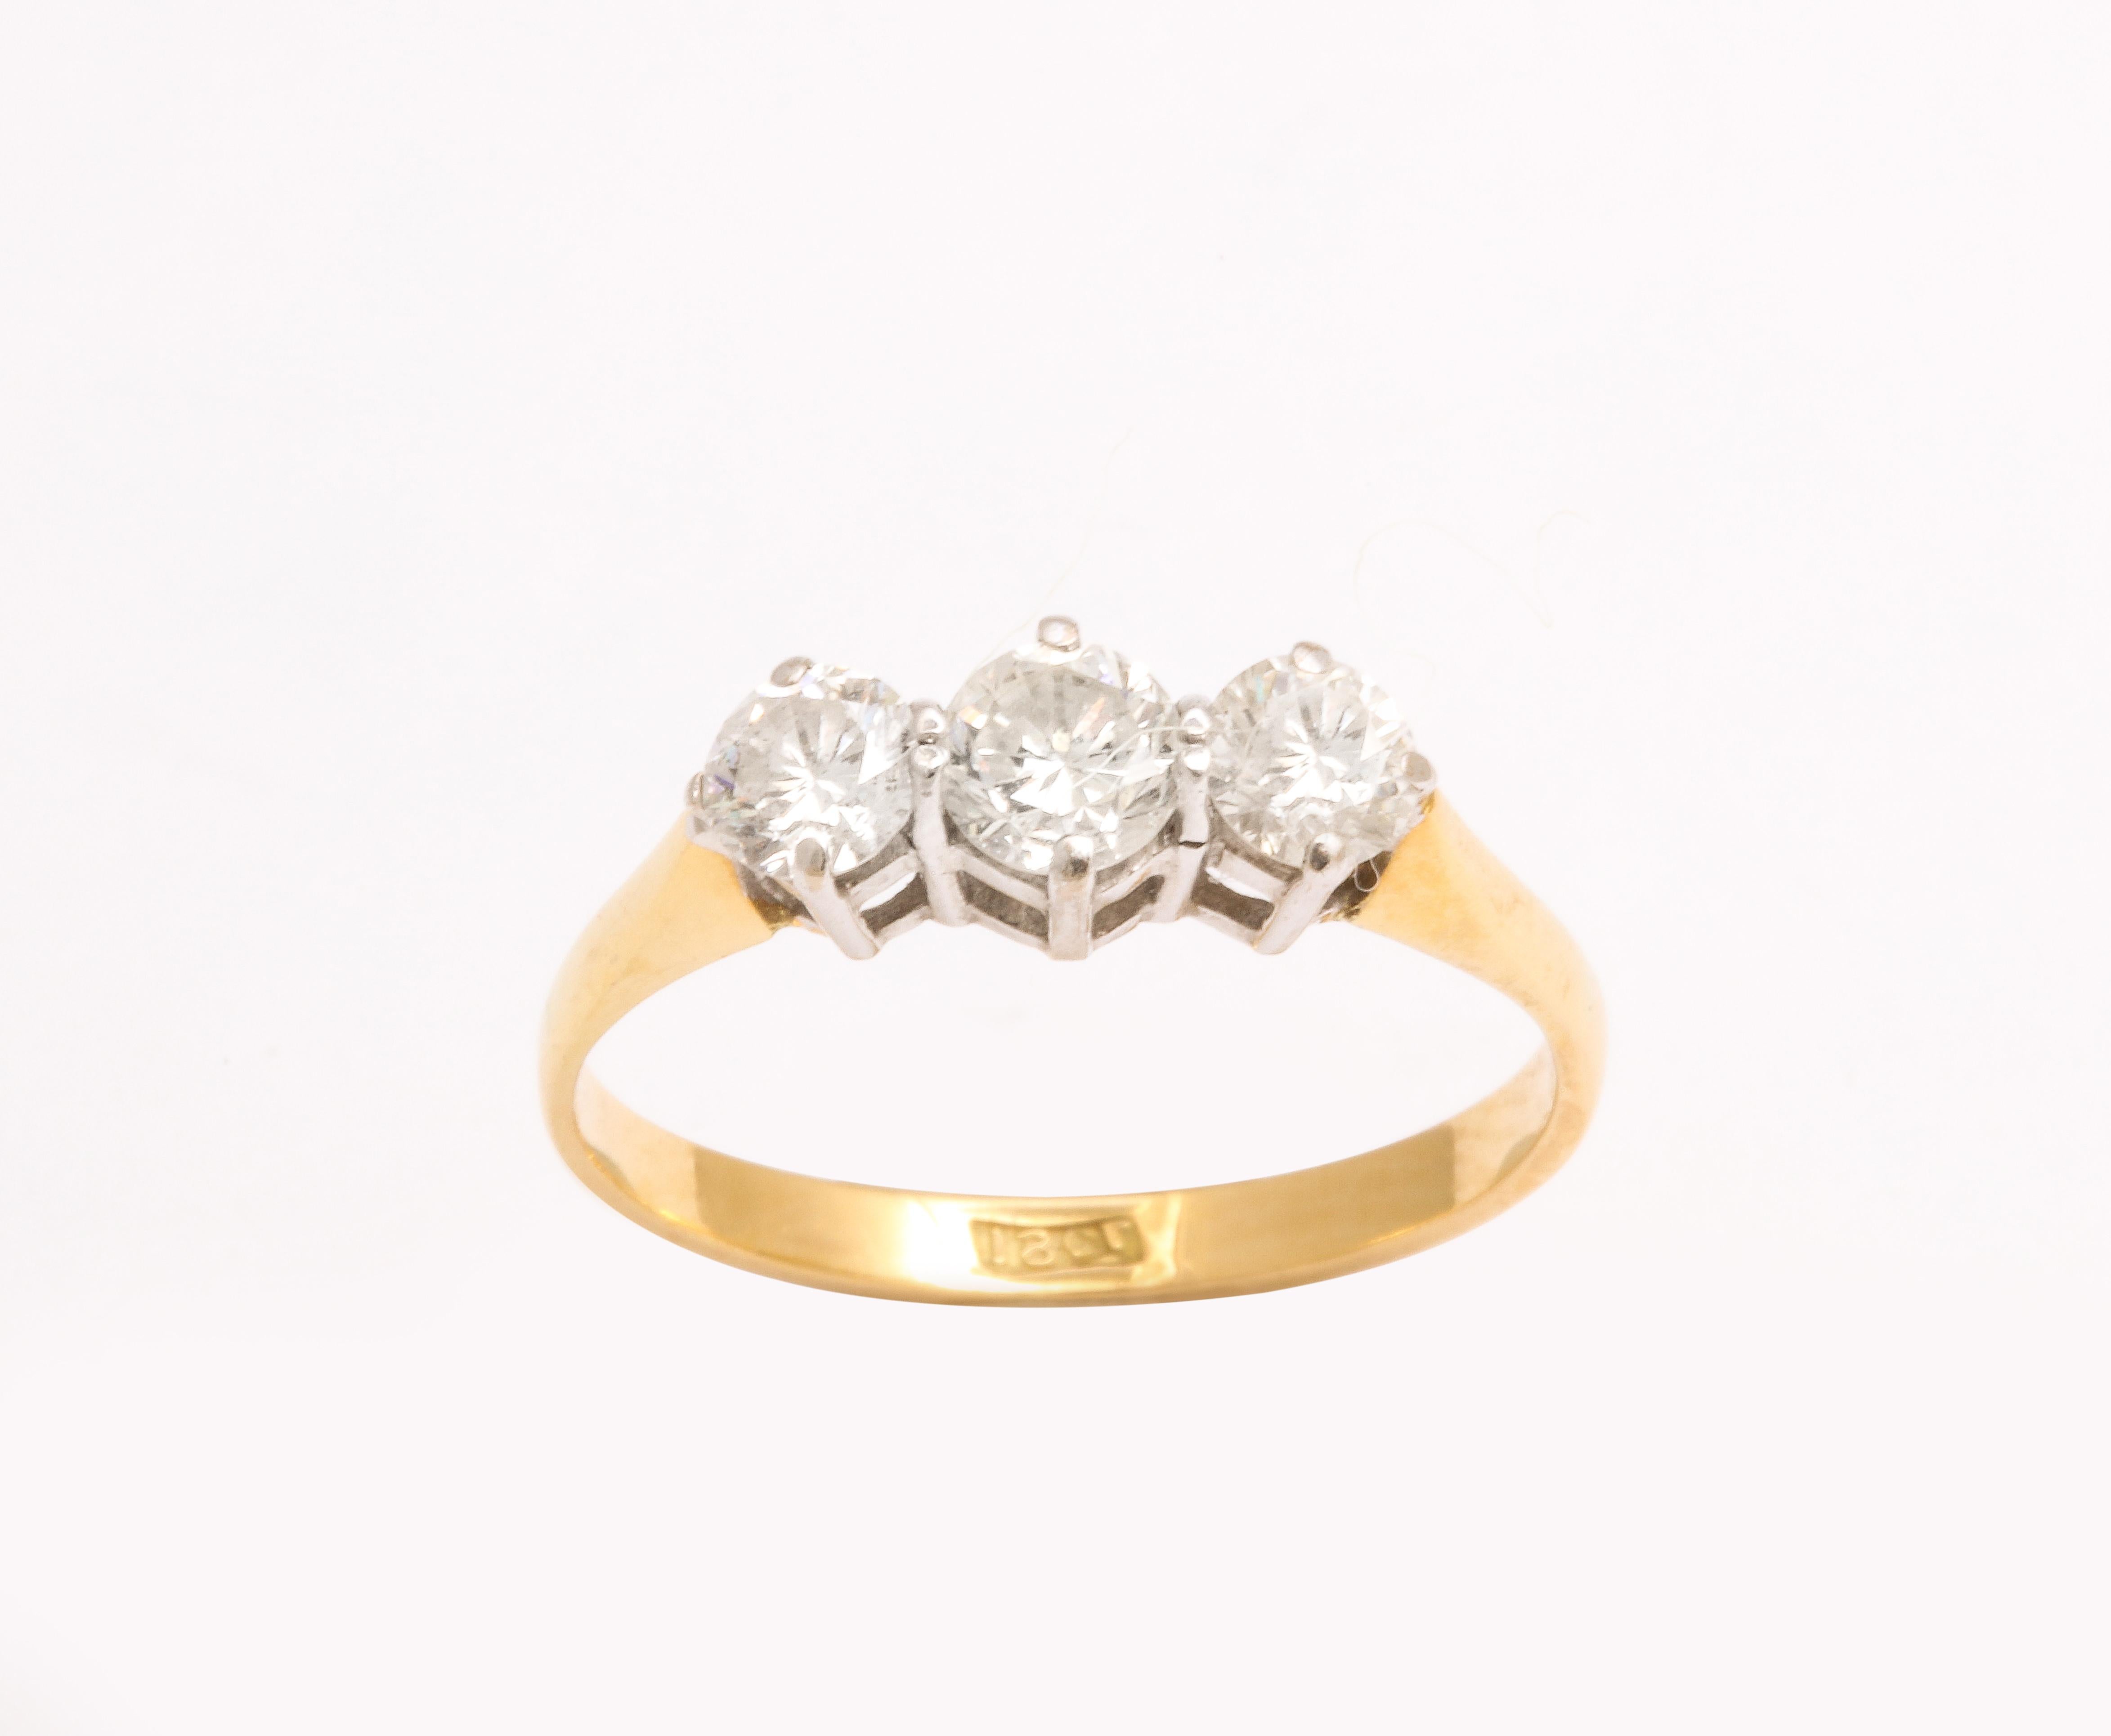 There is something delicious about three stone diamond bands. They can be worn alone, with an engagement ring or stacked with other bands. Three extremely fine transitional diamonds c. 1900 are set in an 18kt gold shank that gracefully curves inward